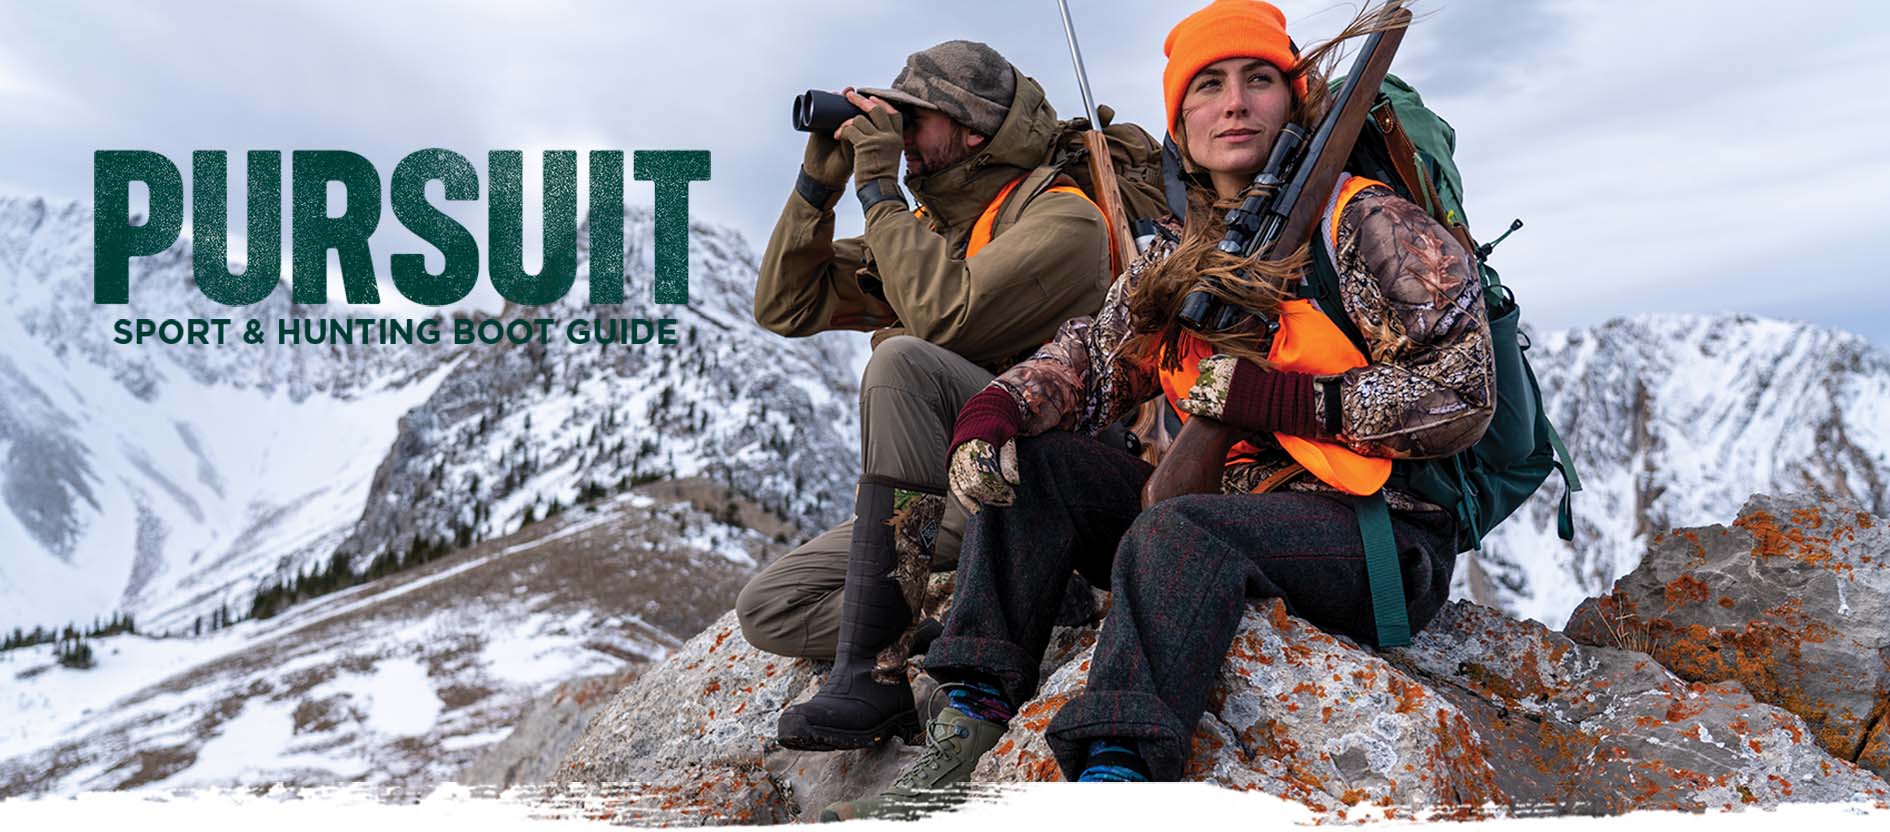 'Pursuit: Sport and hunting boot guide' Two hunters sitting cliffside looking for any signs of wildlife